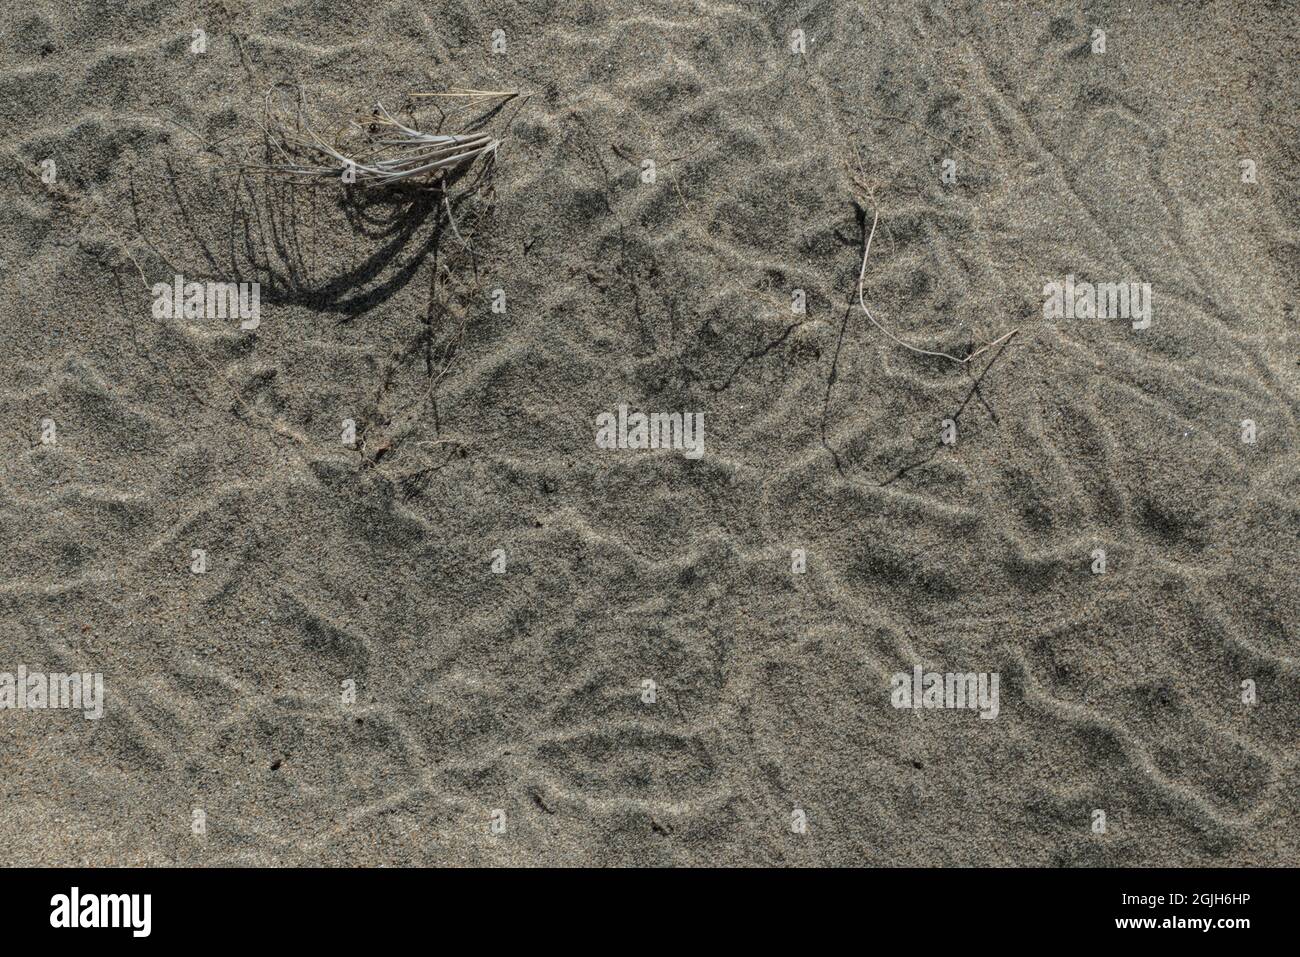 Squiggles in a sand dune, tracks of something small that passed, in Coastal California. Stock Photo